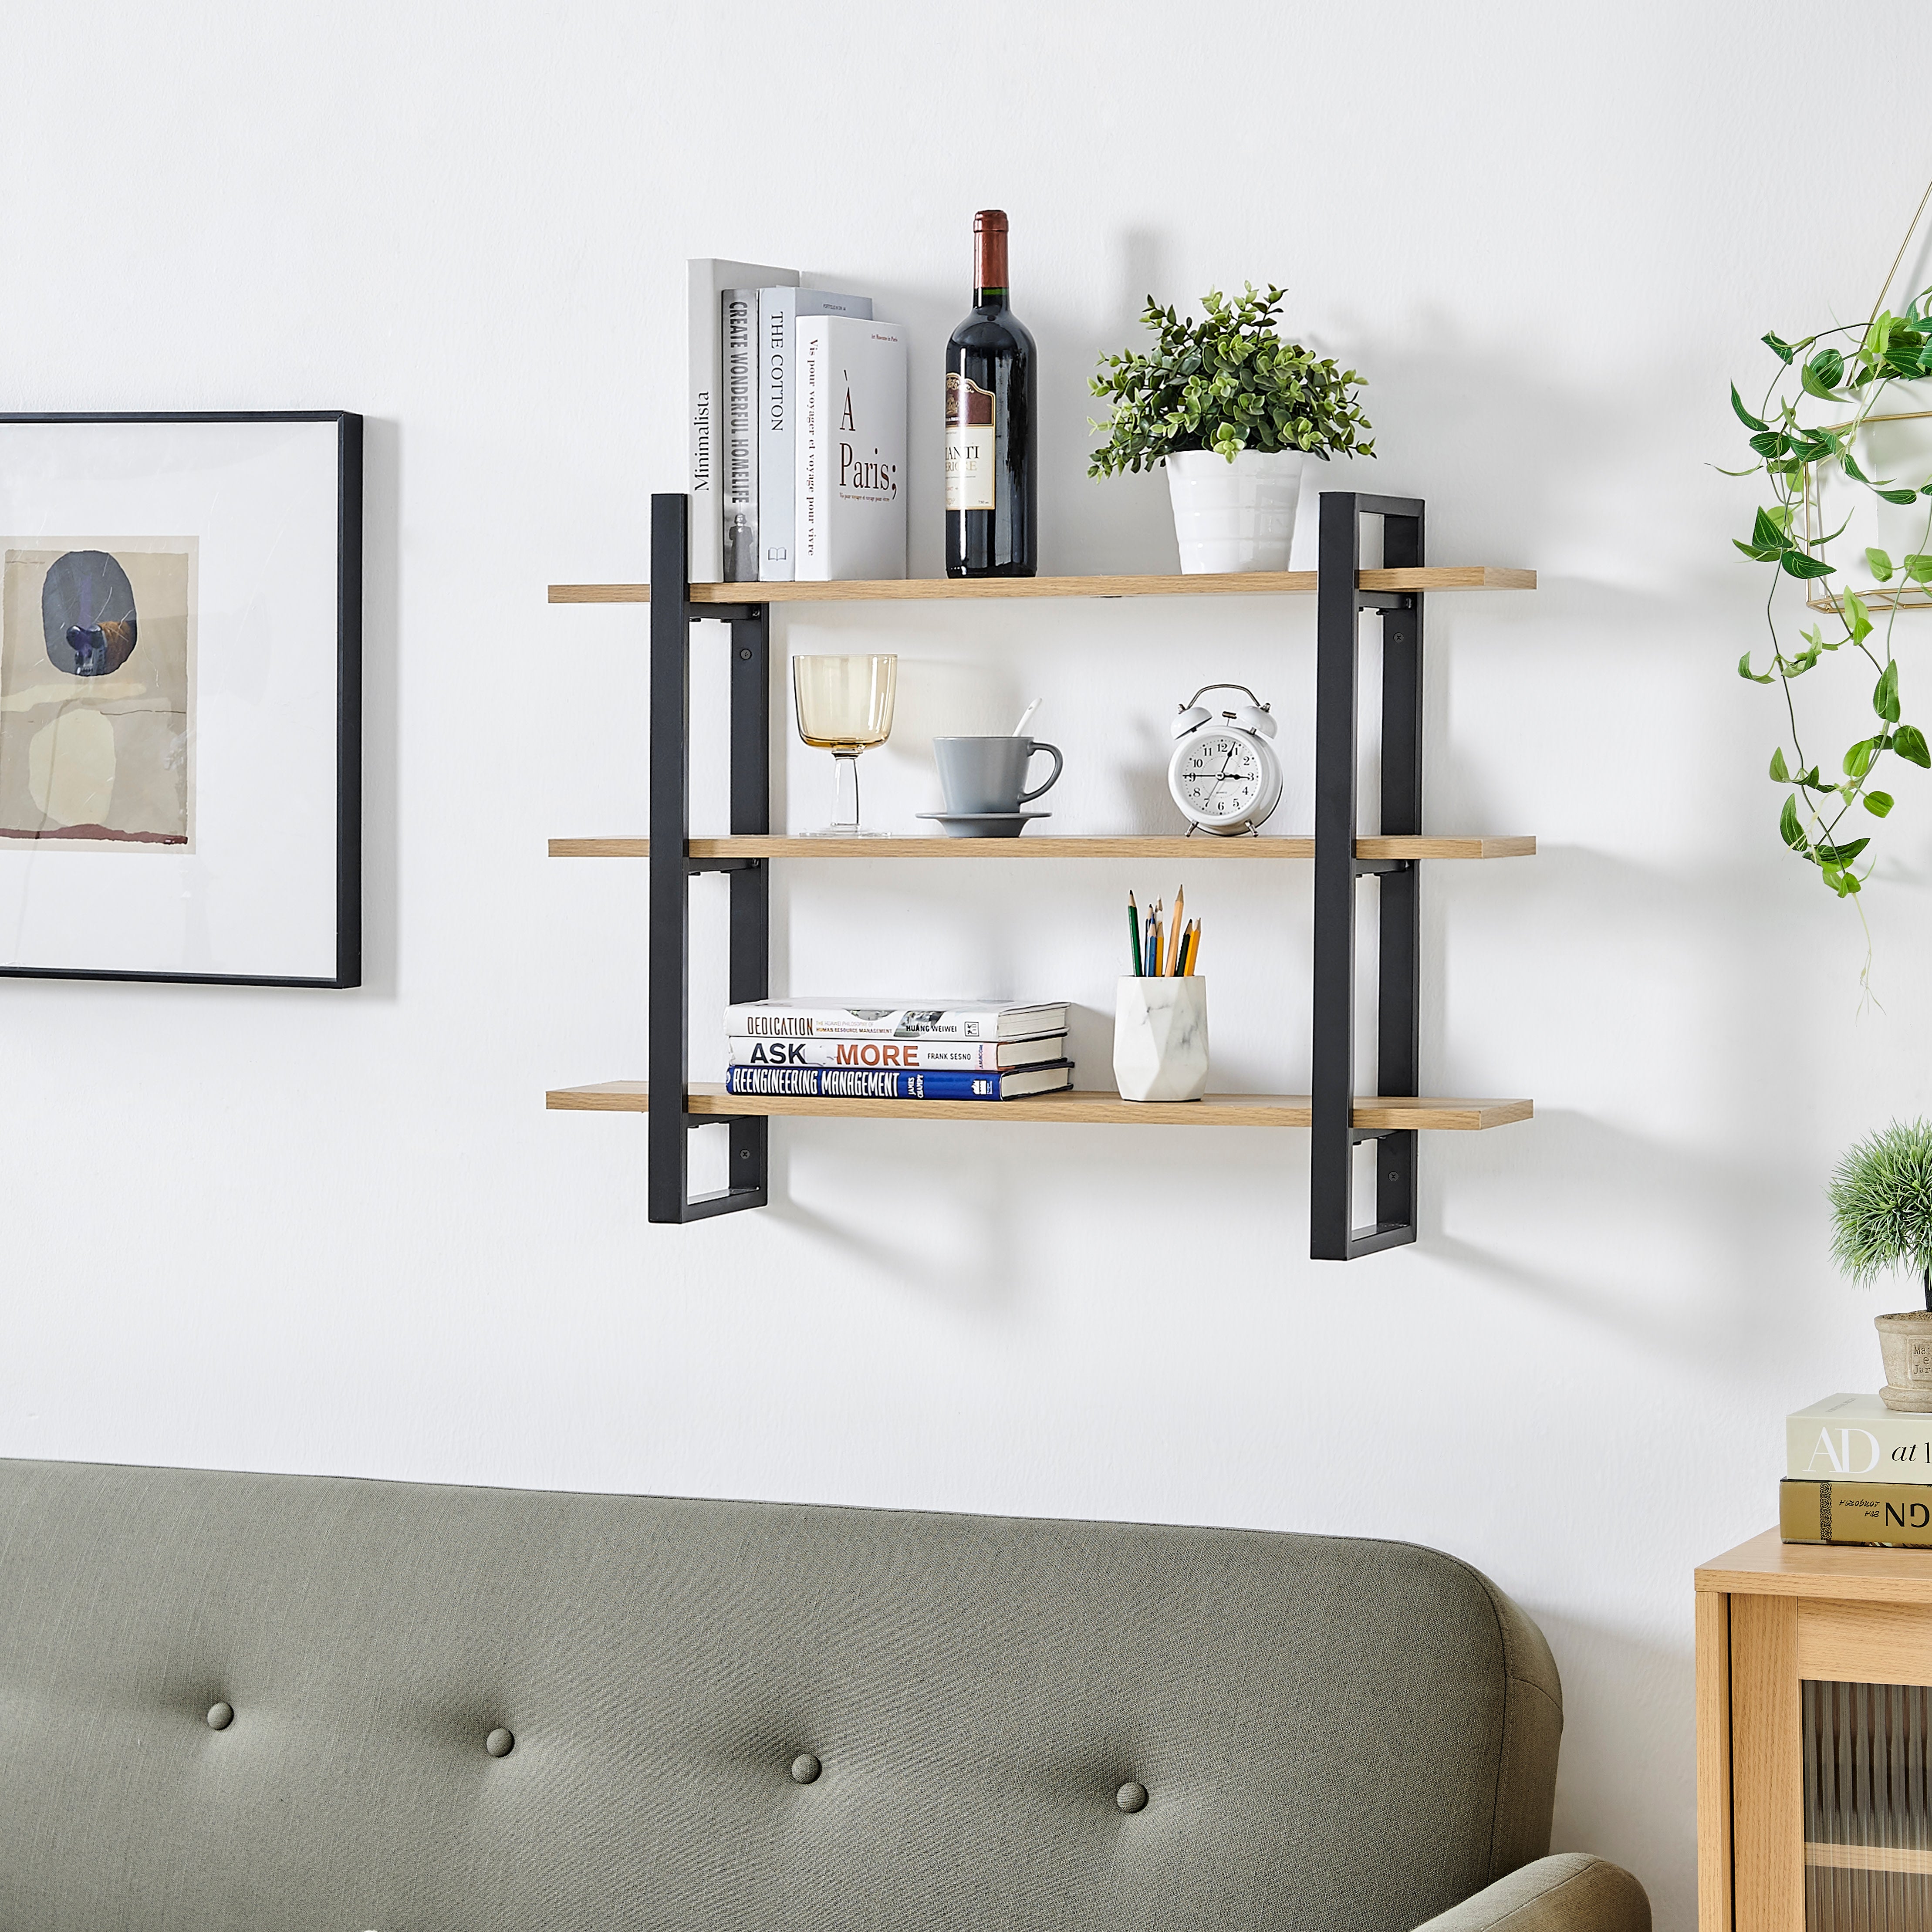 A Long Rustic Floating Shelf, Two Brackets, Laundry Room Storage